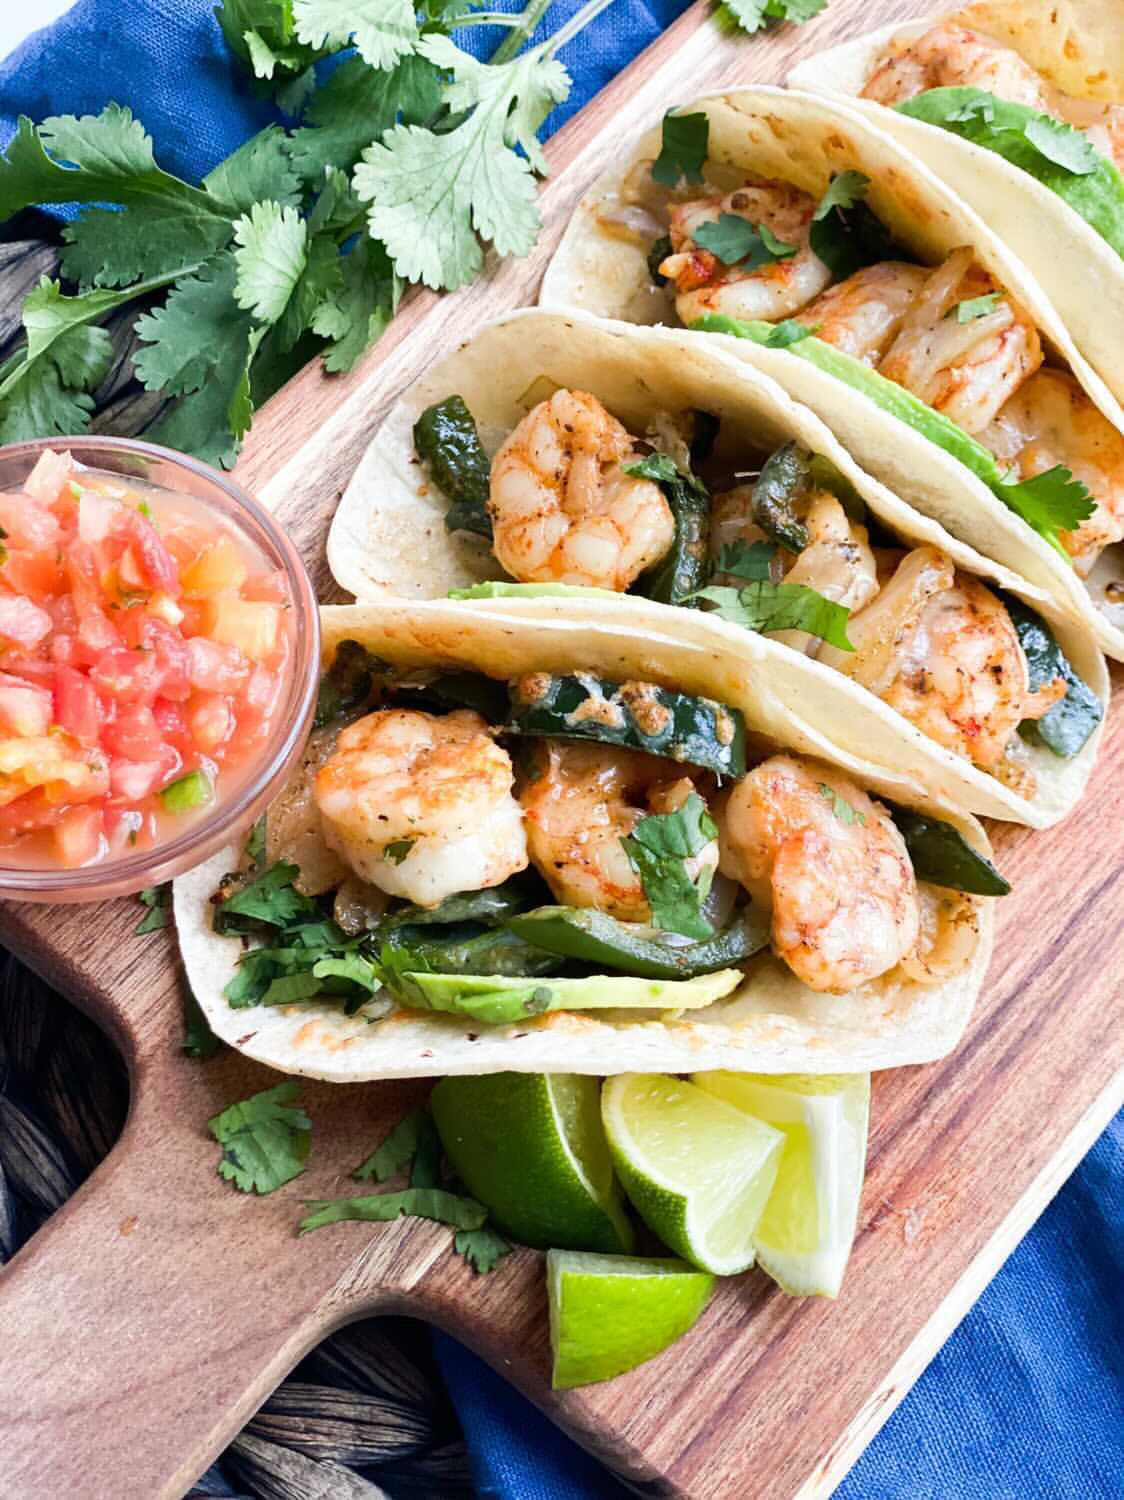 Valentines Day Dinner of shrimp tacos with poblanos, limes, salsa and cilantro